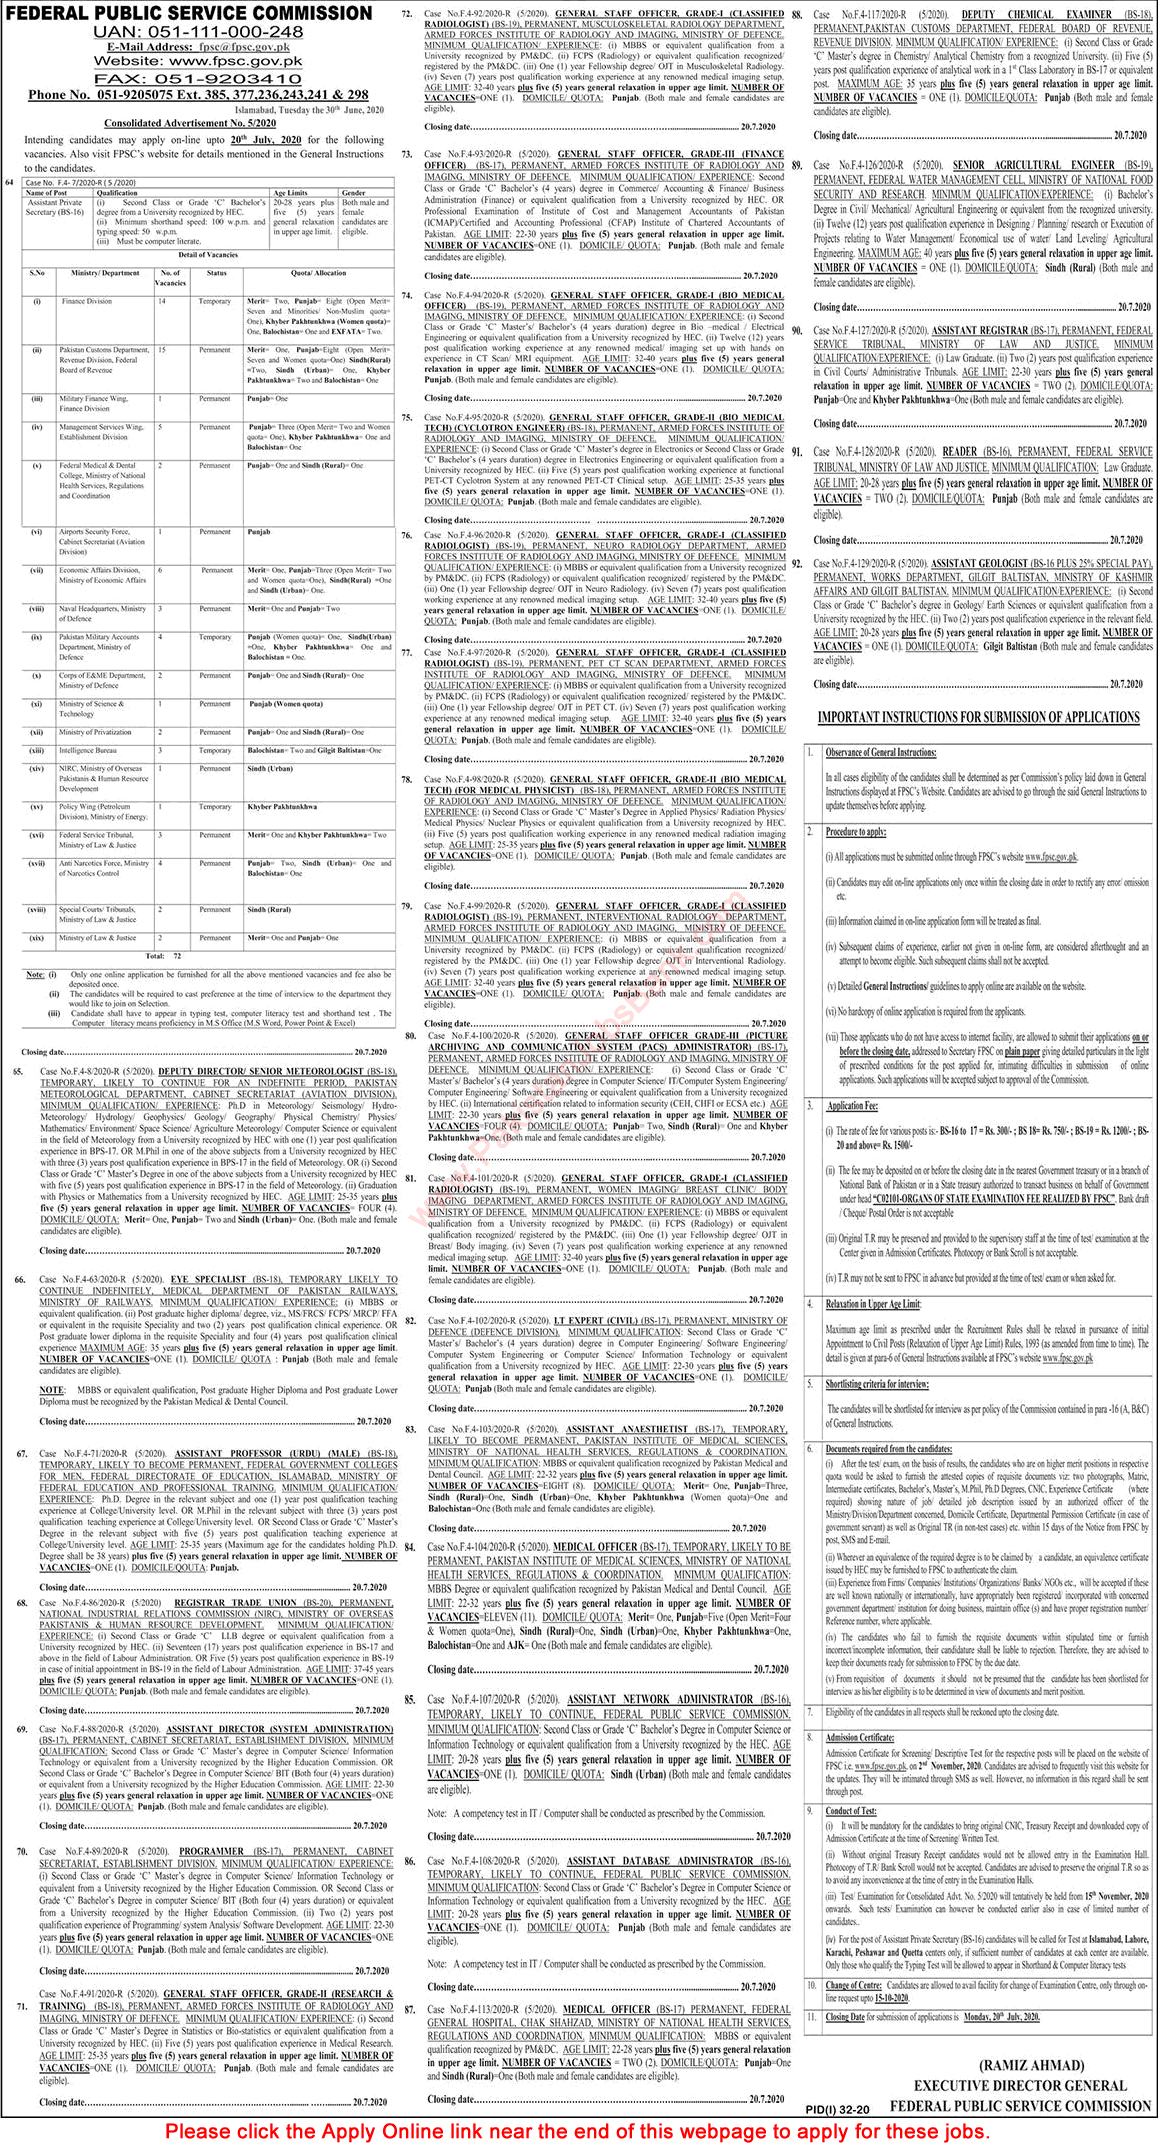 FPSC Jobs July 2020 Apply Online Consolidated Advertisement No 05/2020 5/2020 Latest